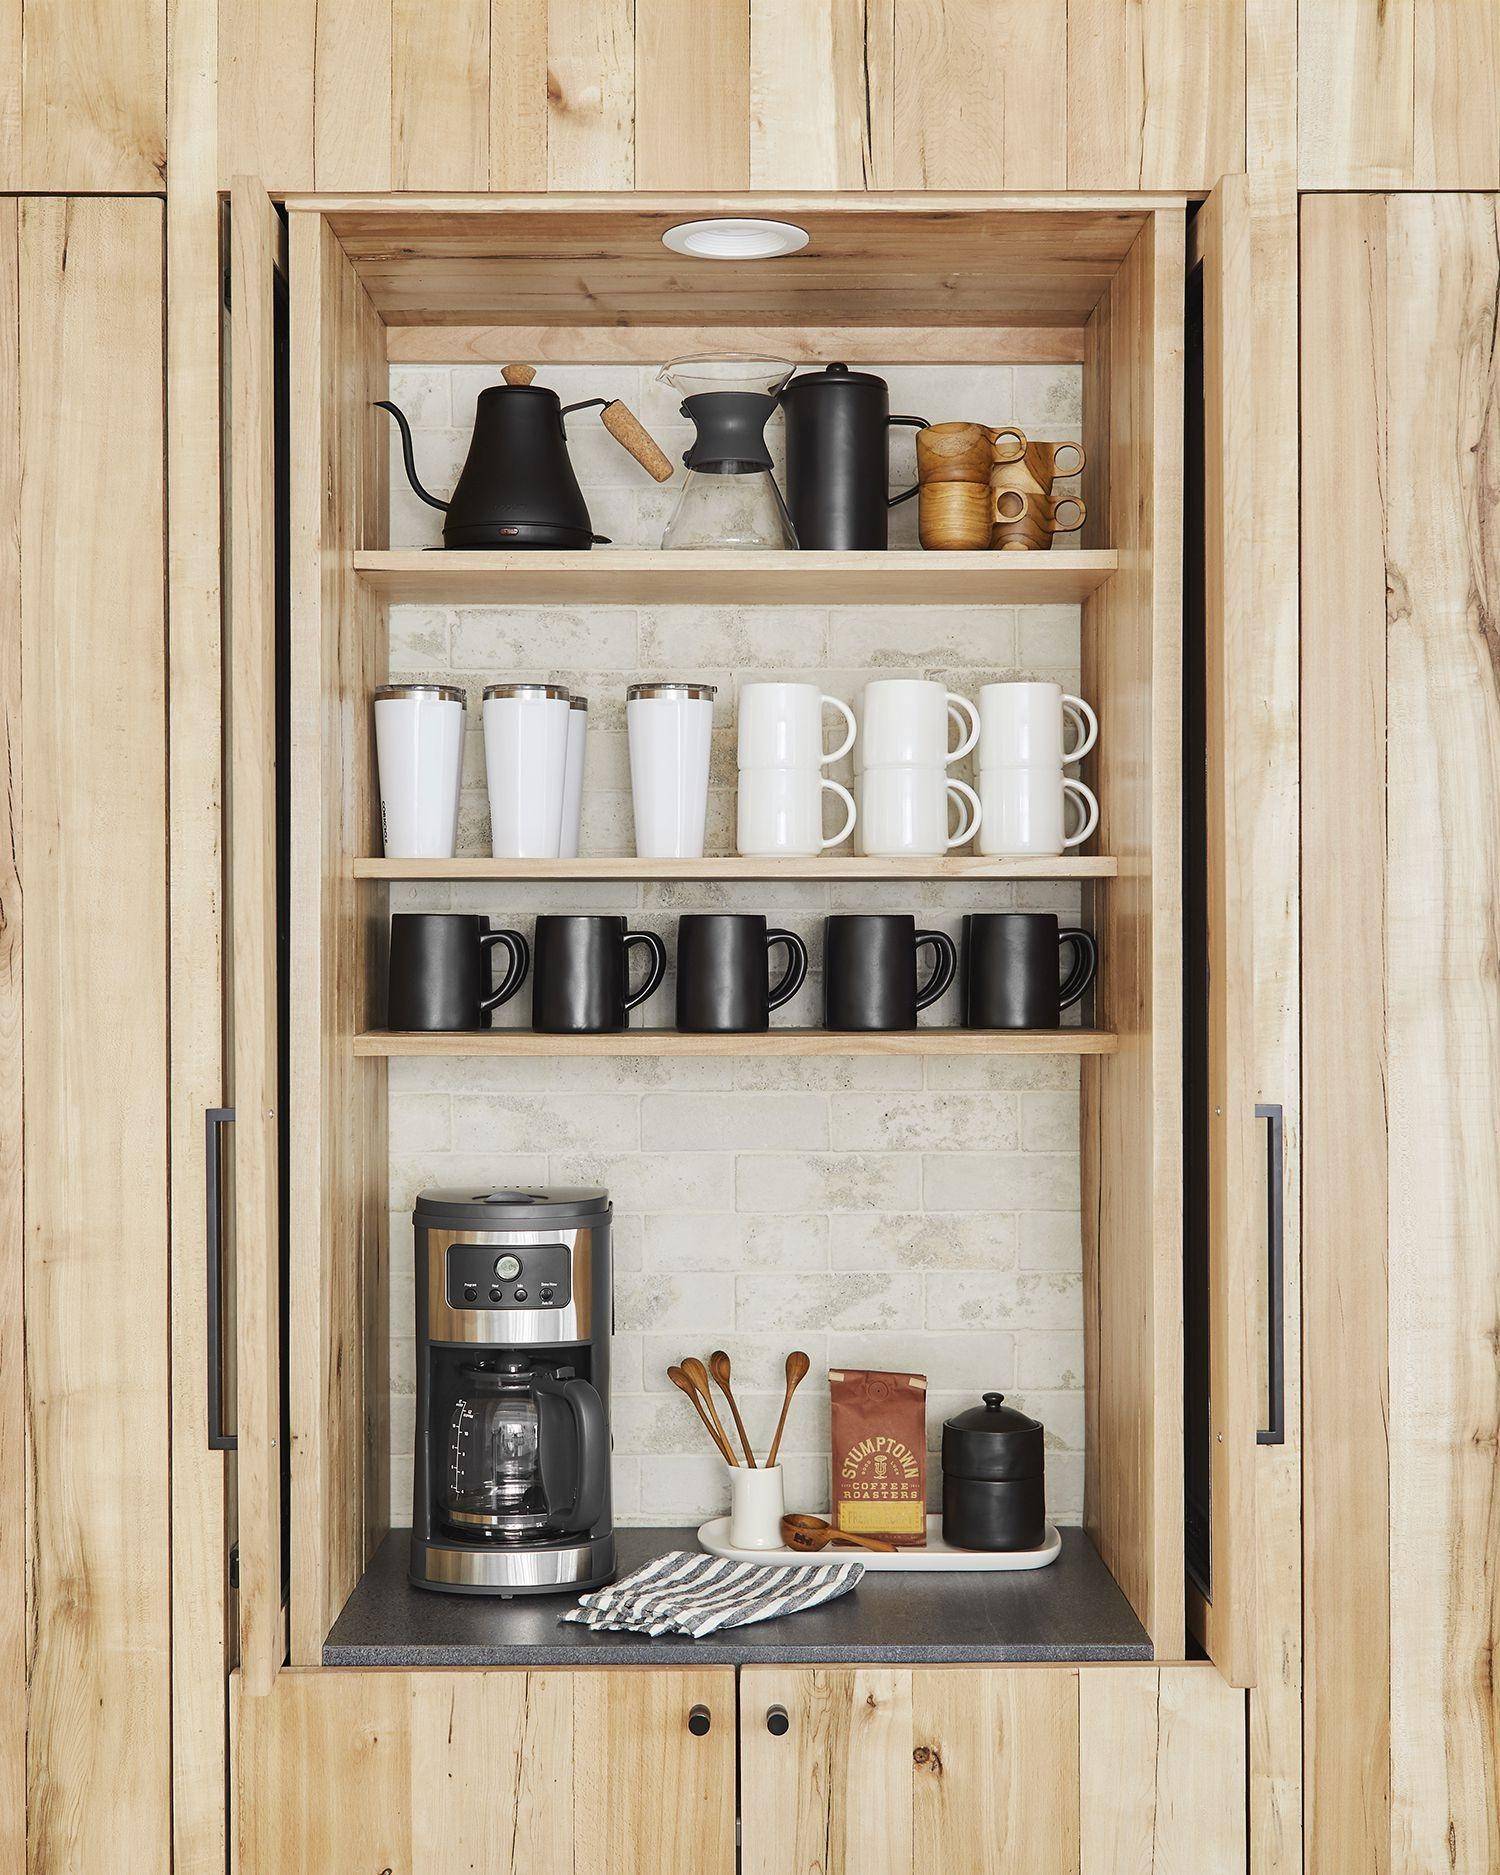 Incredible Coffee Station Ideas